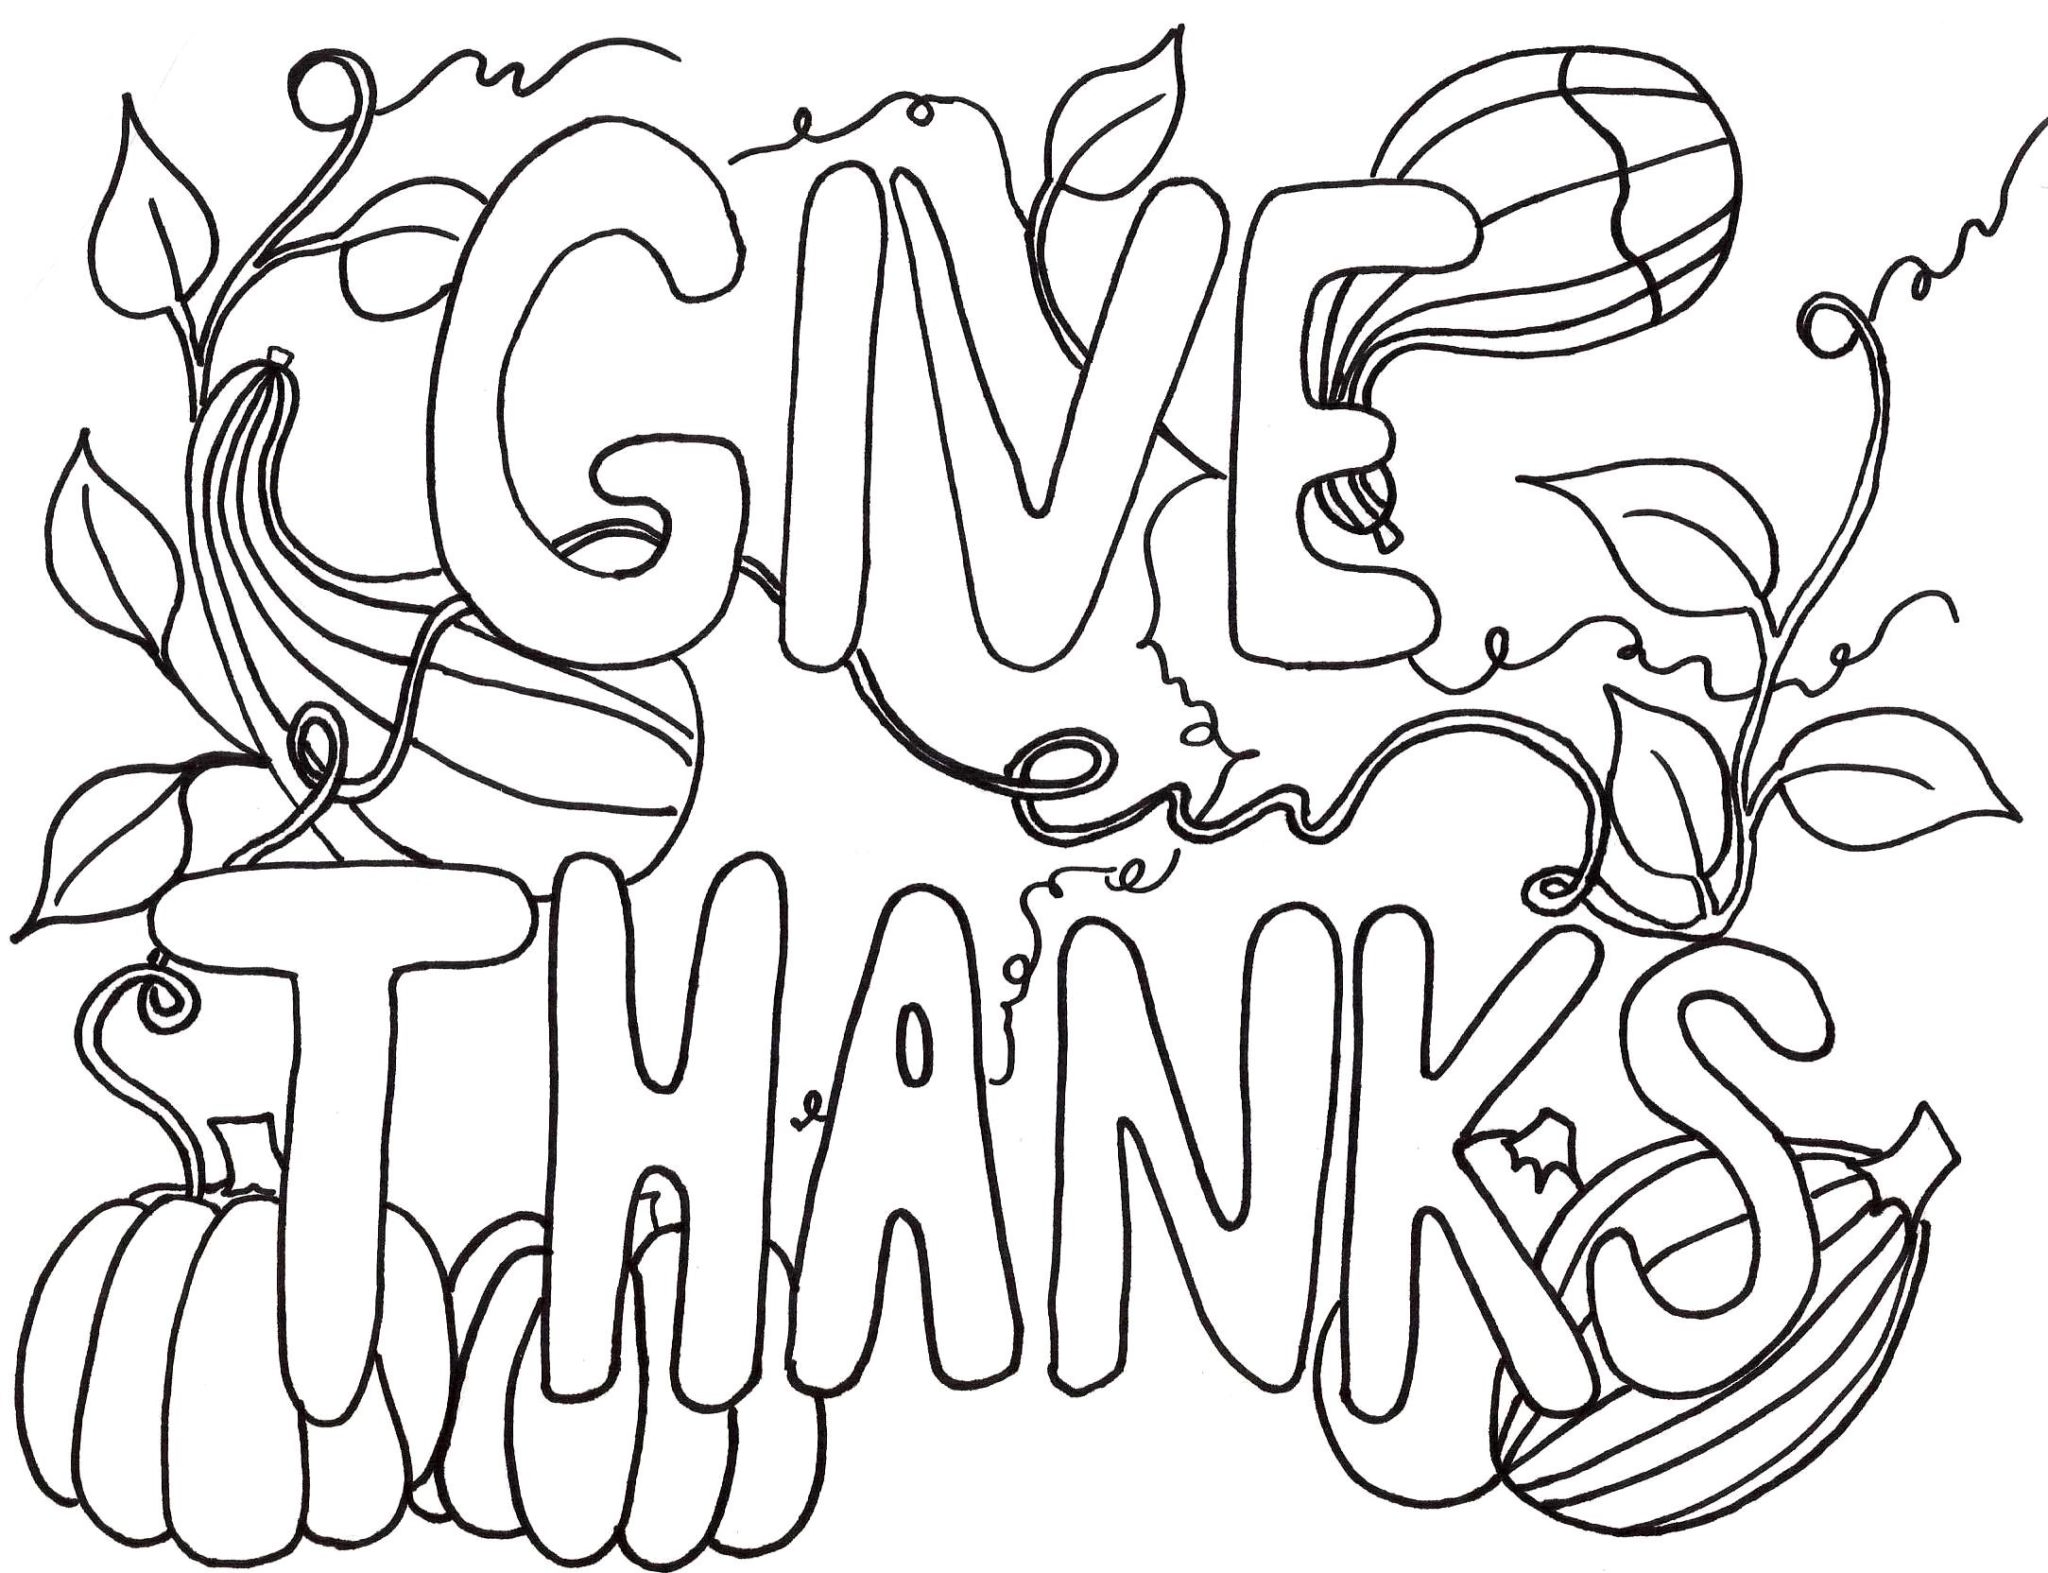 Download Thanksgiving Coloring Pages for Adults - Best Coloring ...